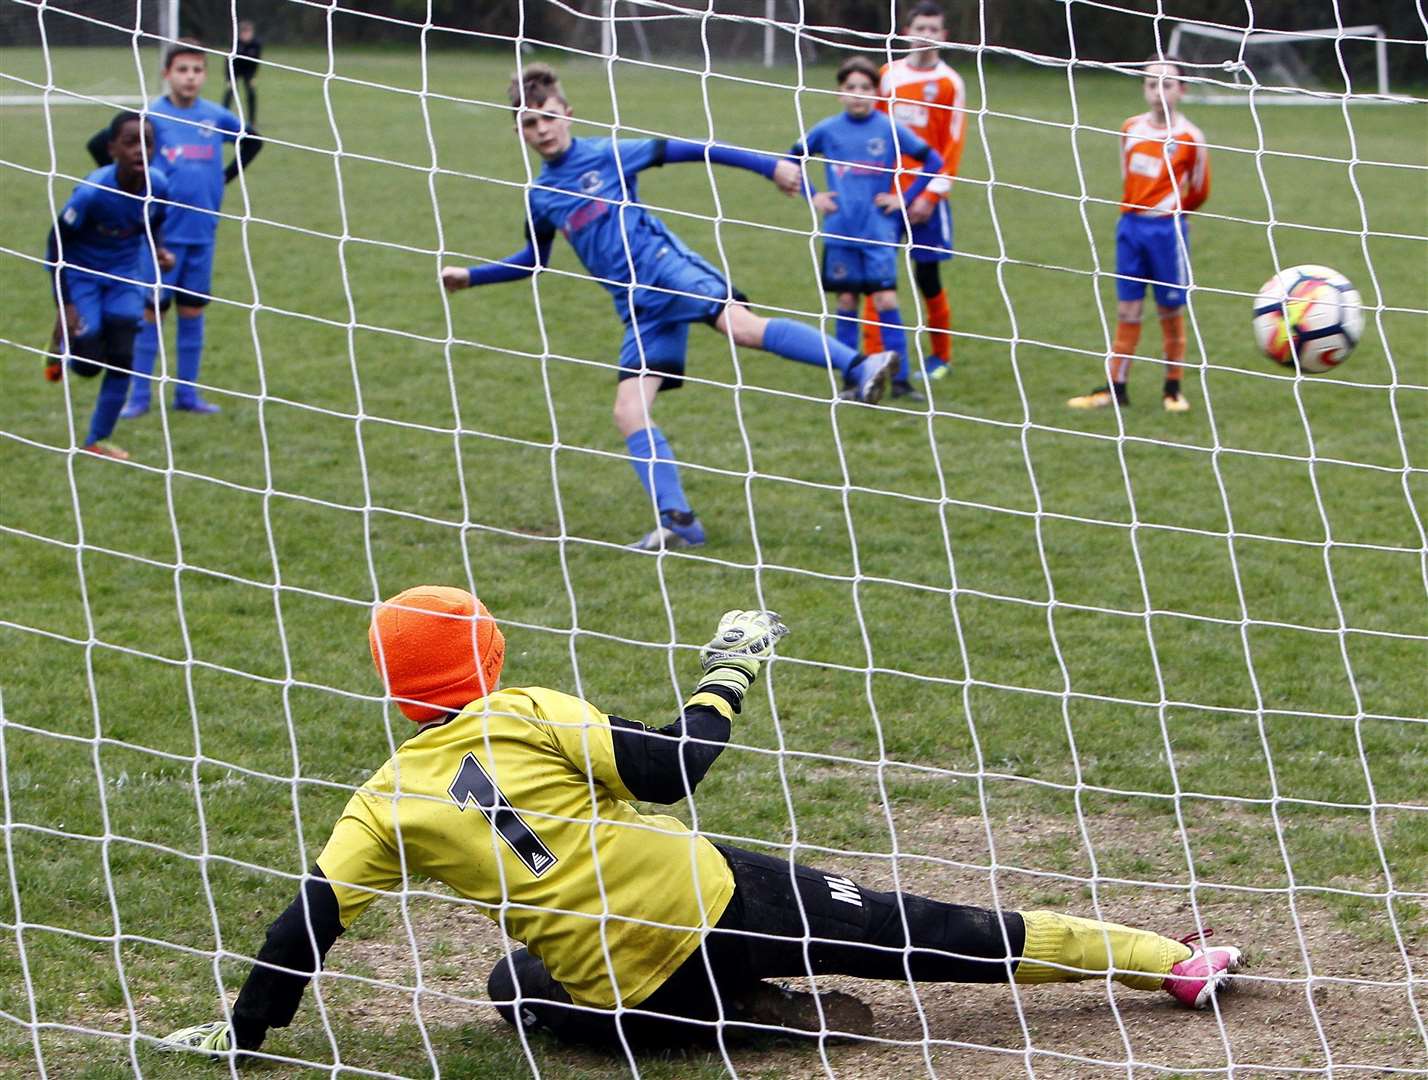 Medway United North under-12s' Harry Egan scores from the penalty spot against Cuxton Cobras under-12s. Picture: Sean Aidan FM8161211